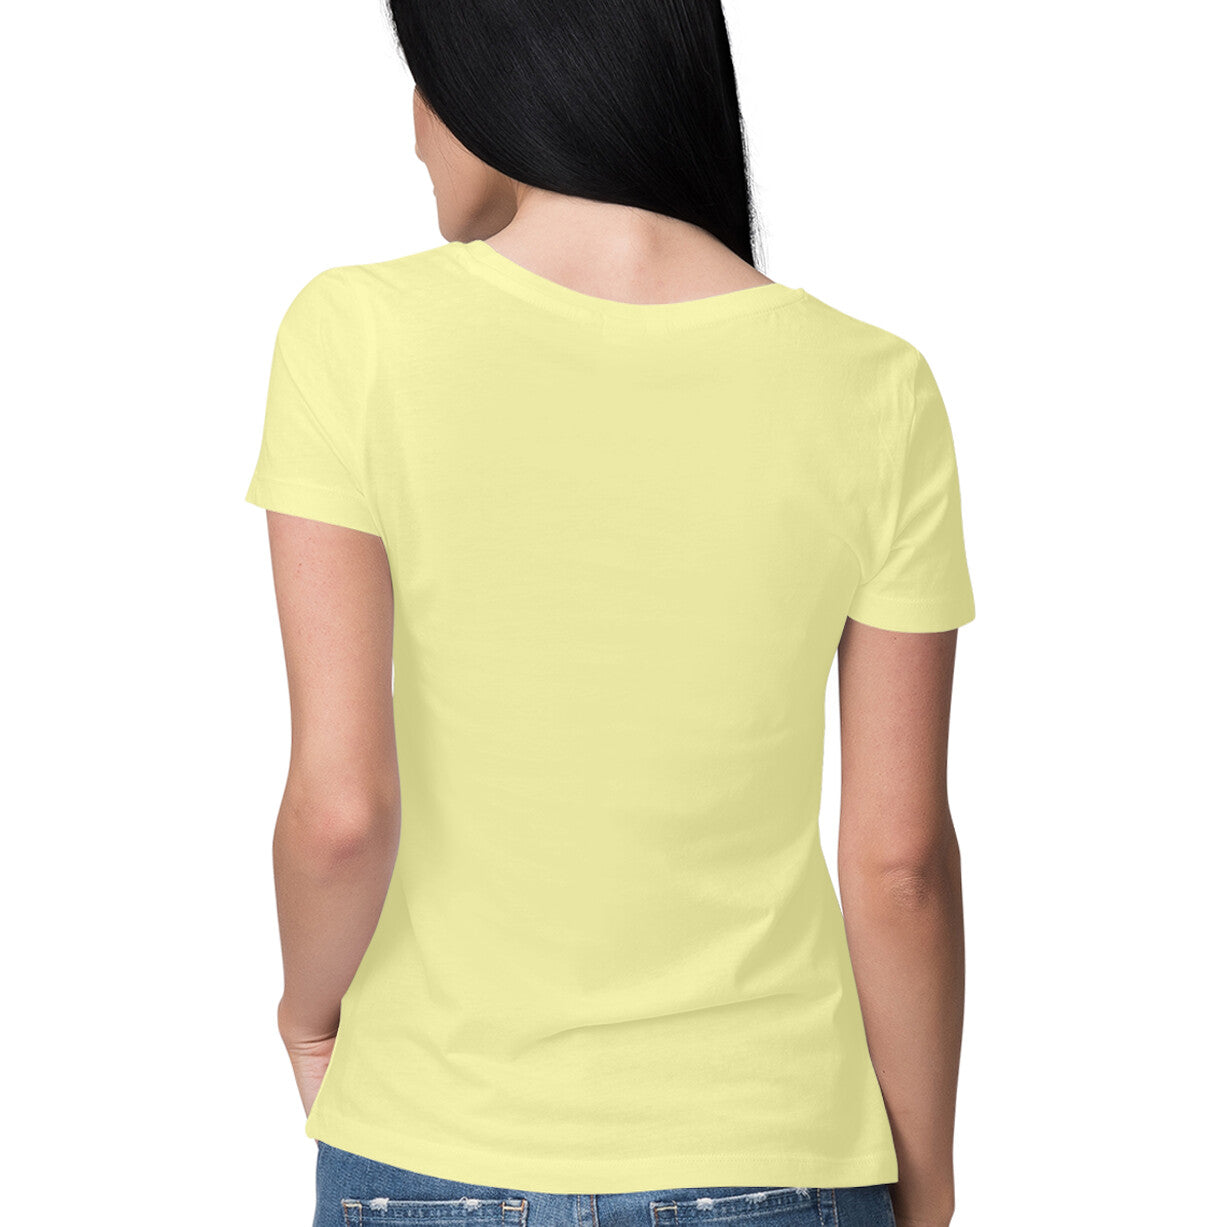 Never Give Up - Women's Butter Yellow Tshirt